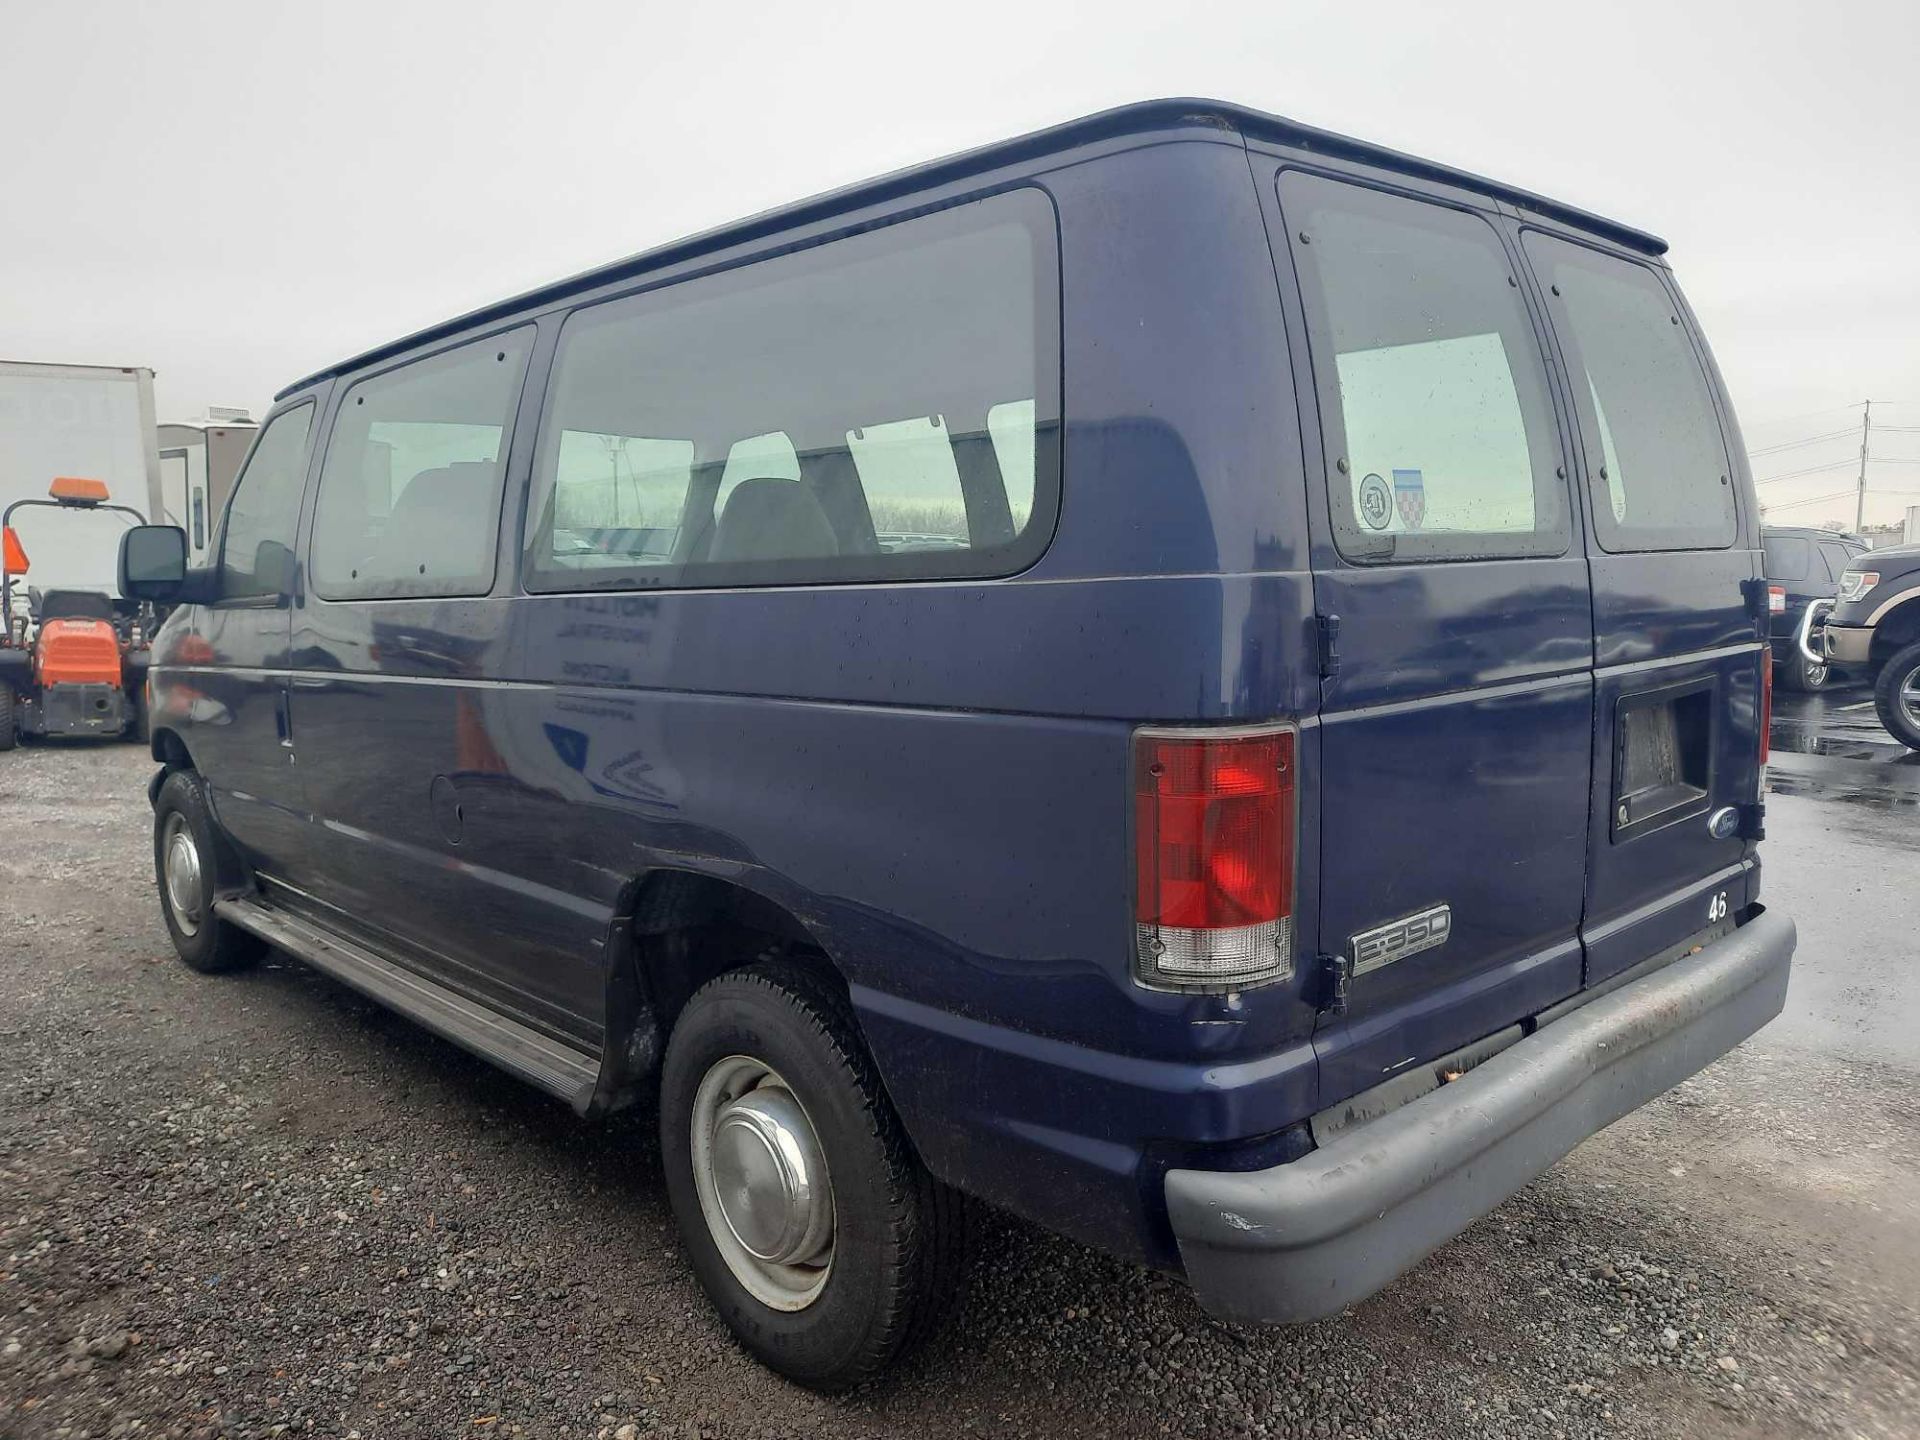 2006 Ford E350 Van - Image 3 of 15